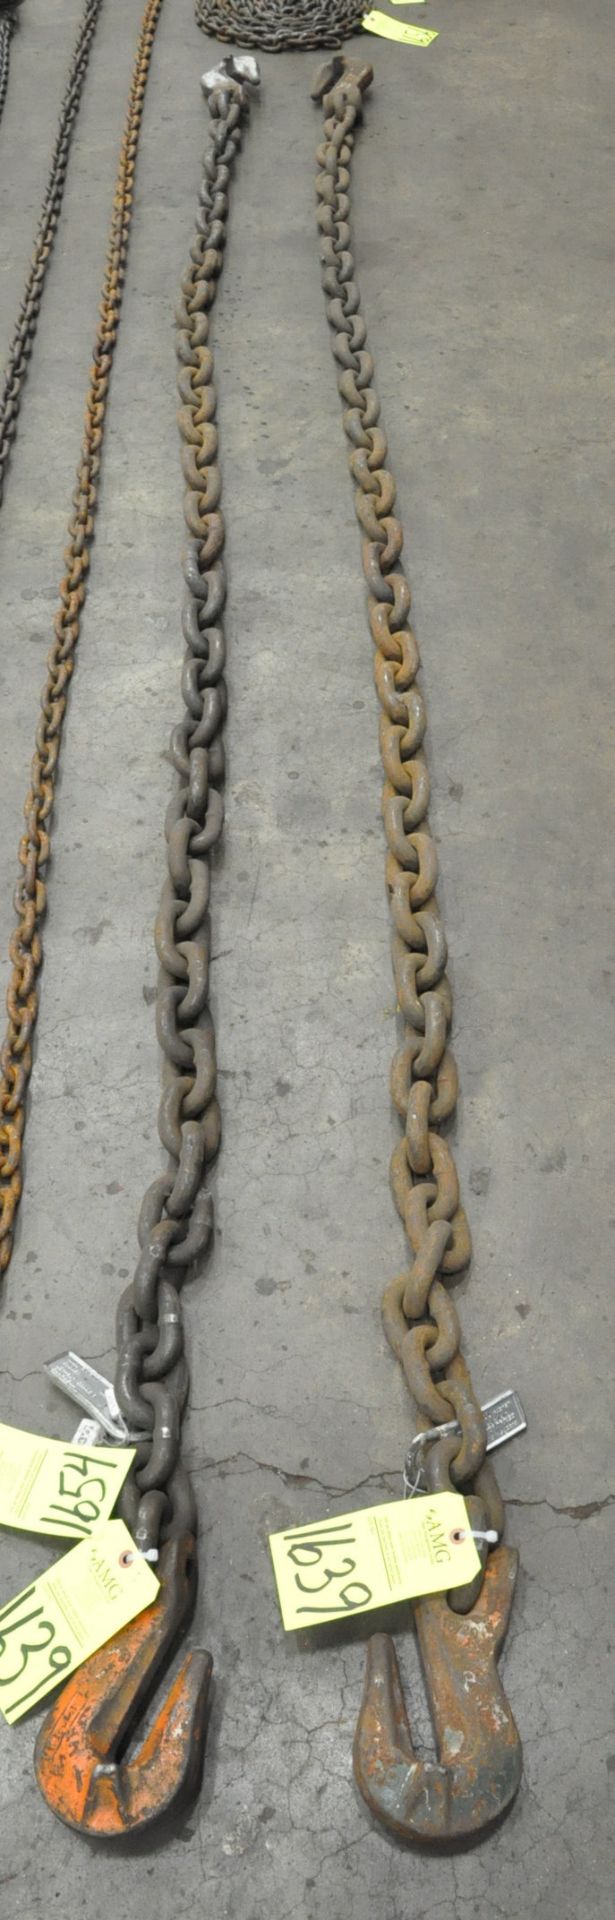 Lot-(2) 3/4" Link x 10' Long 2-Hook Chain, Cert Tag, (G-24), (Yellow Tag)